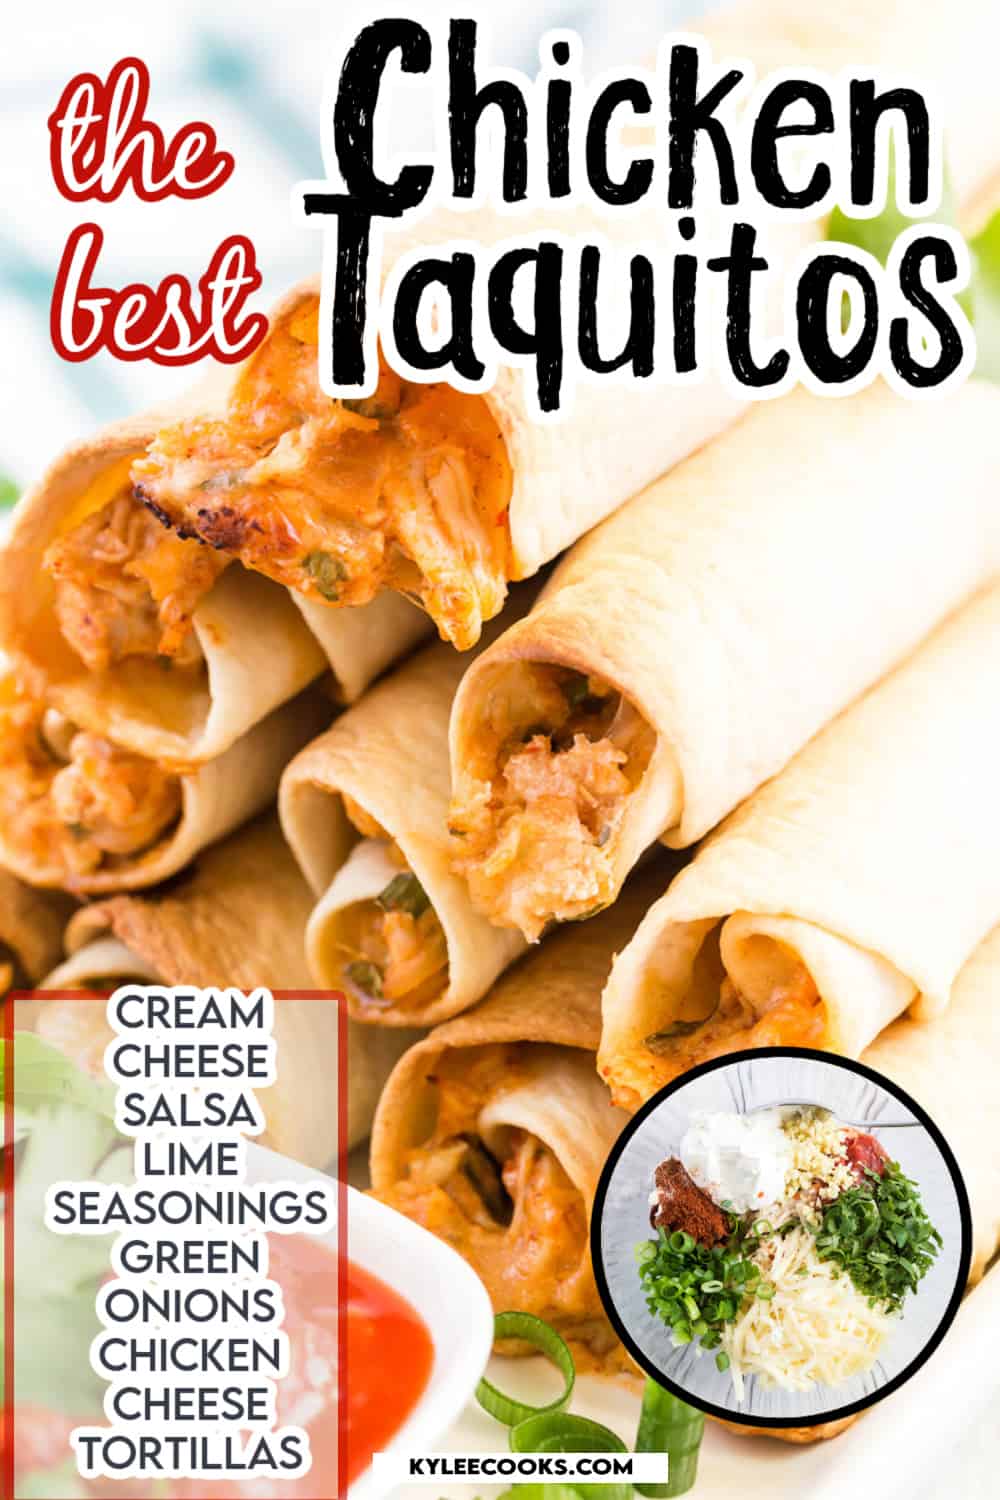 chicken taquitos on a white platter with ingredients and recipe name overlaid in text.